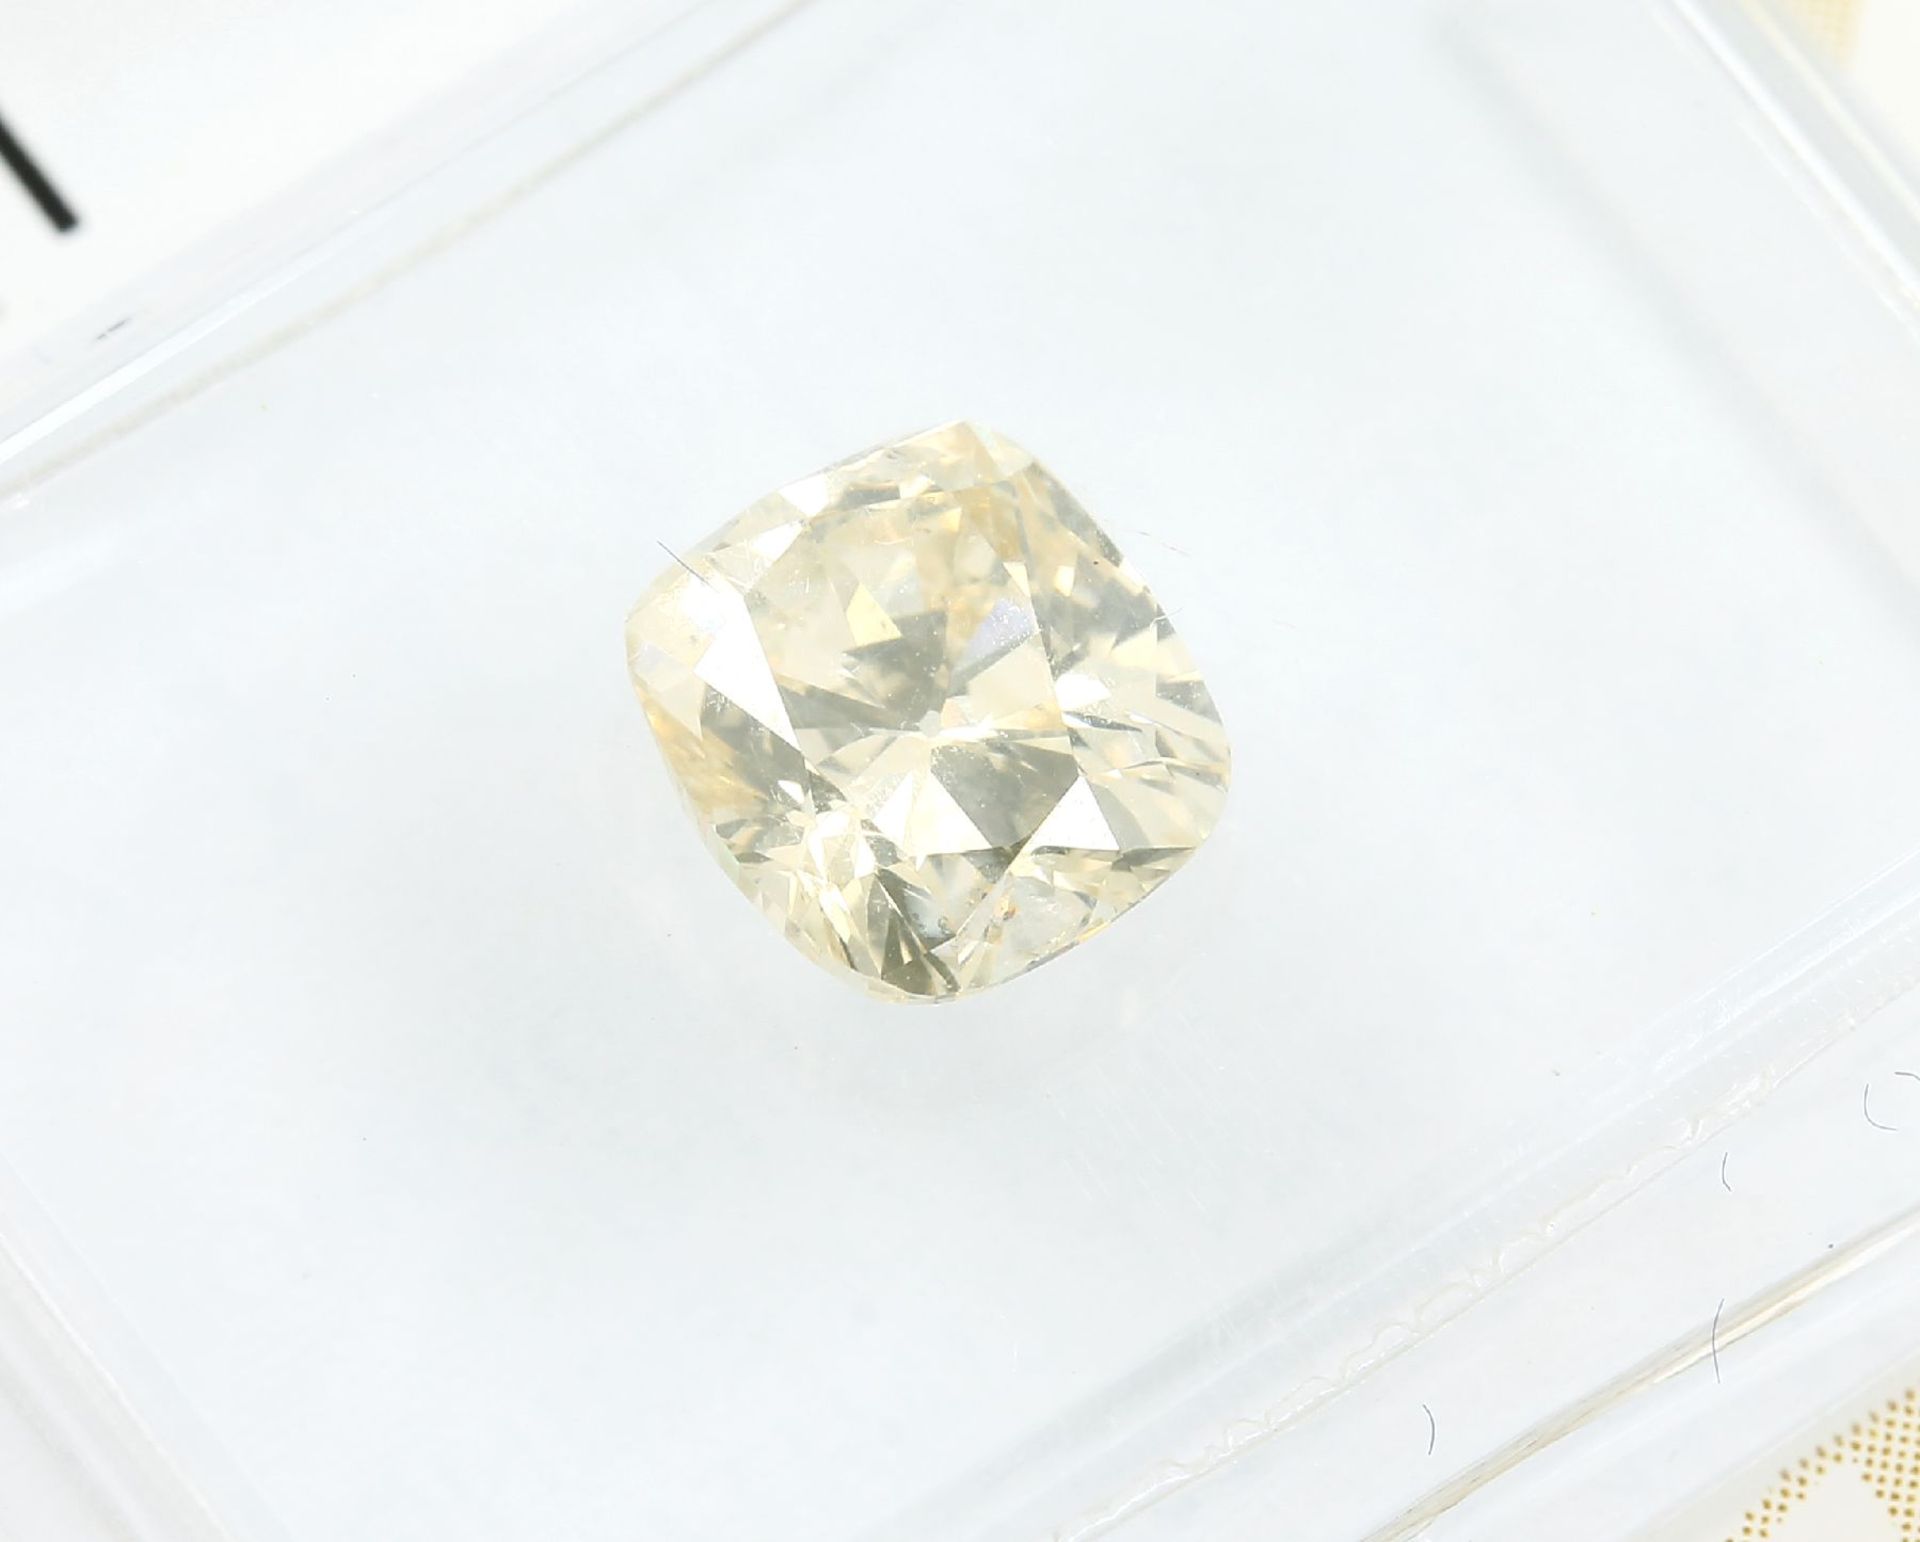 Loser Diamant, 0.91 ct natural Fancy Brownish Yellow/p1, - Image 2 of 3